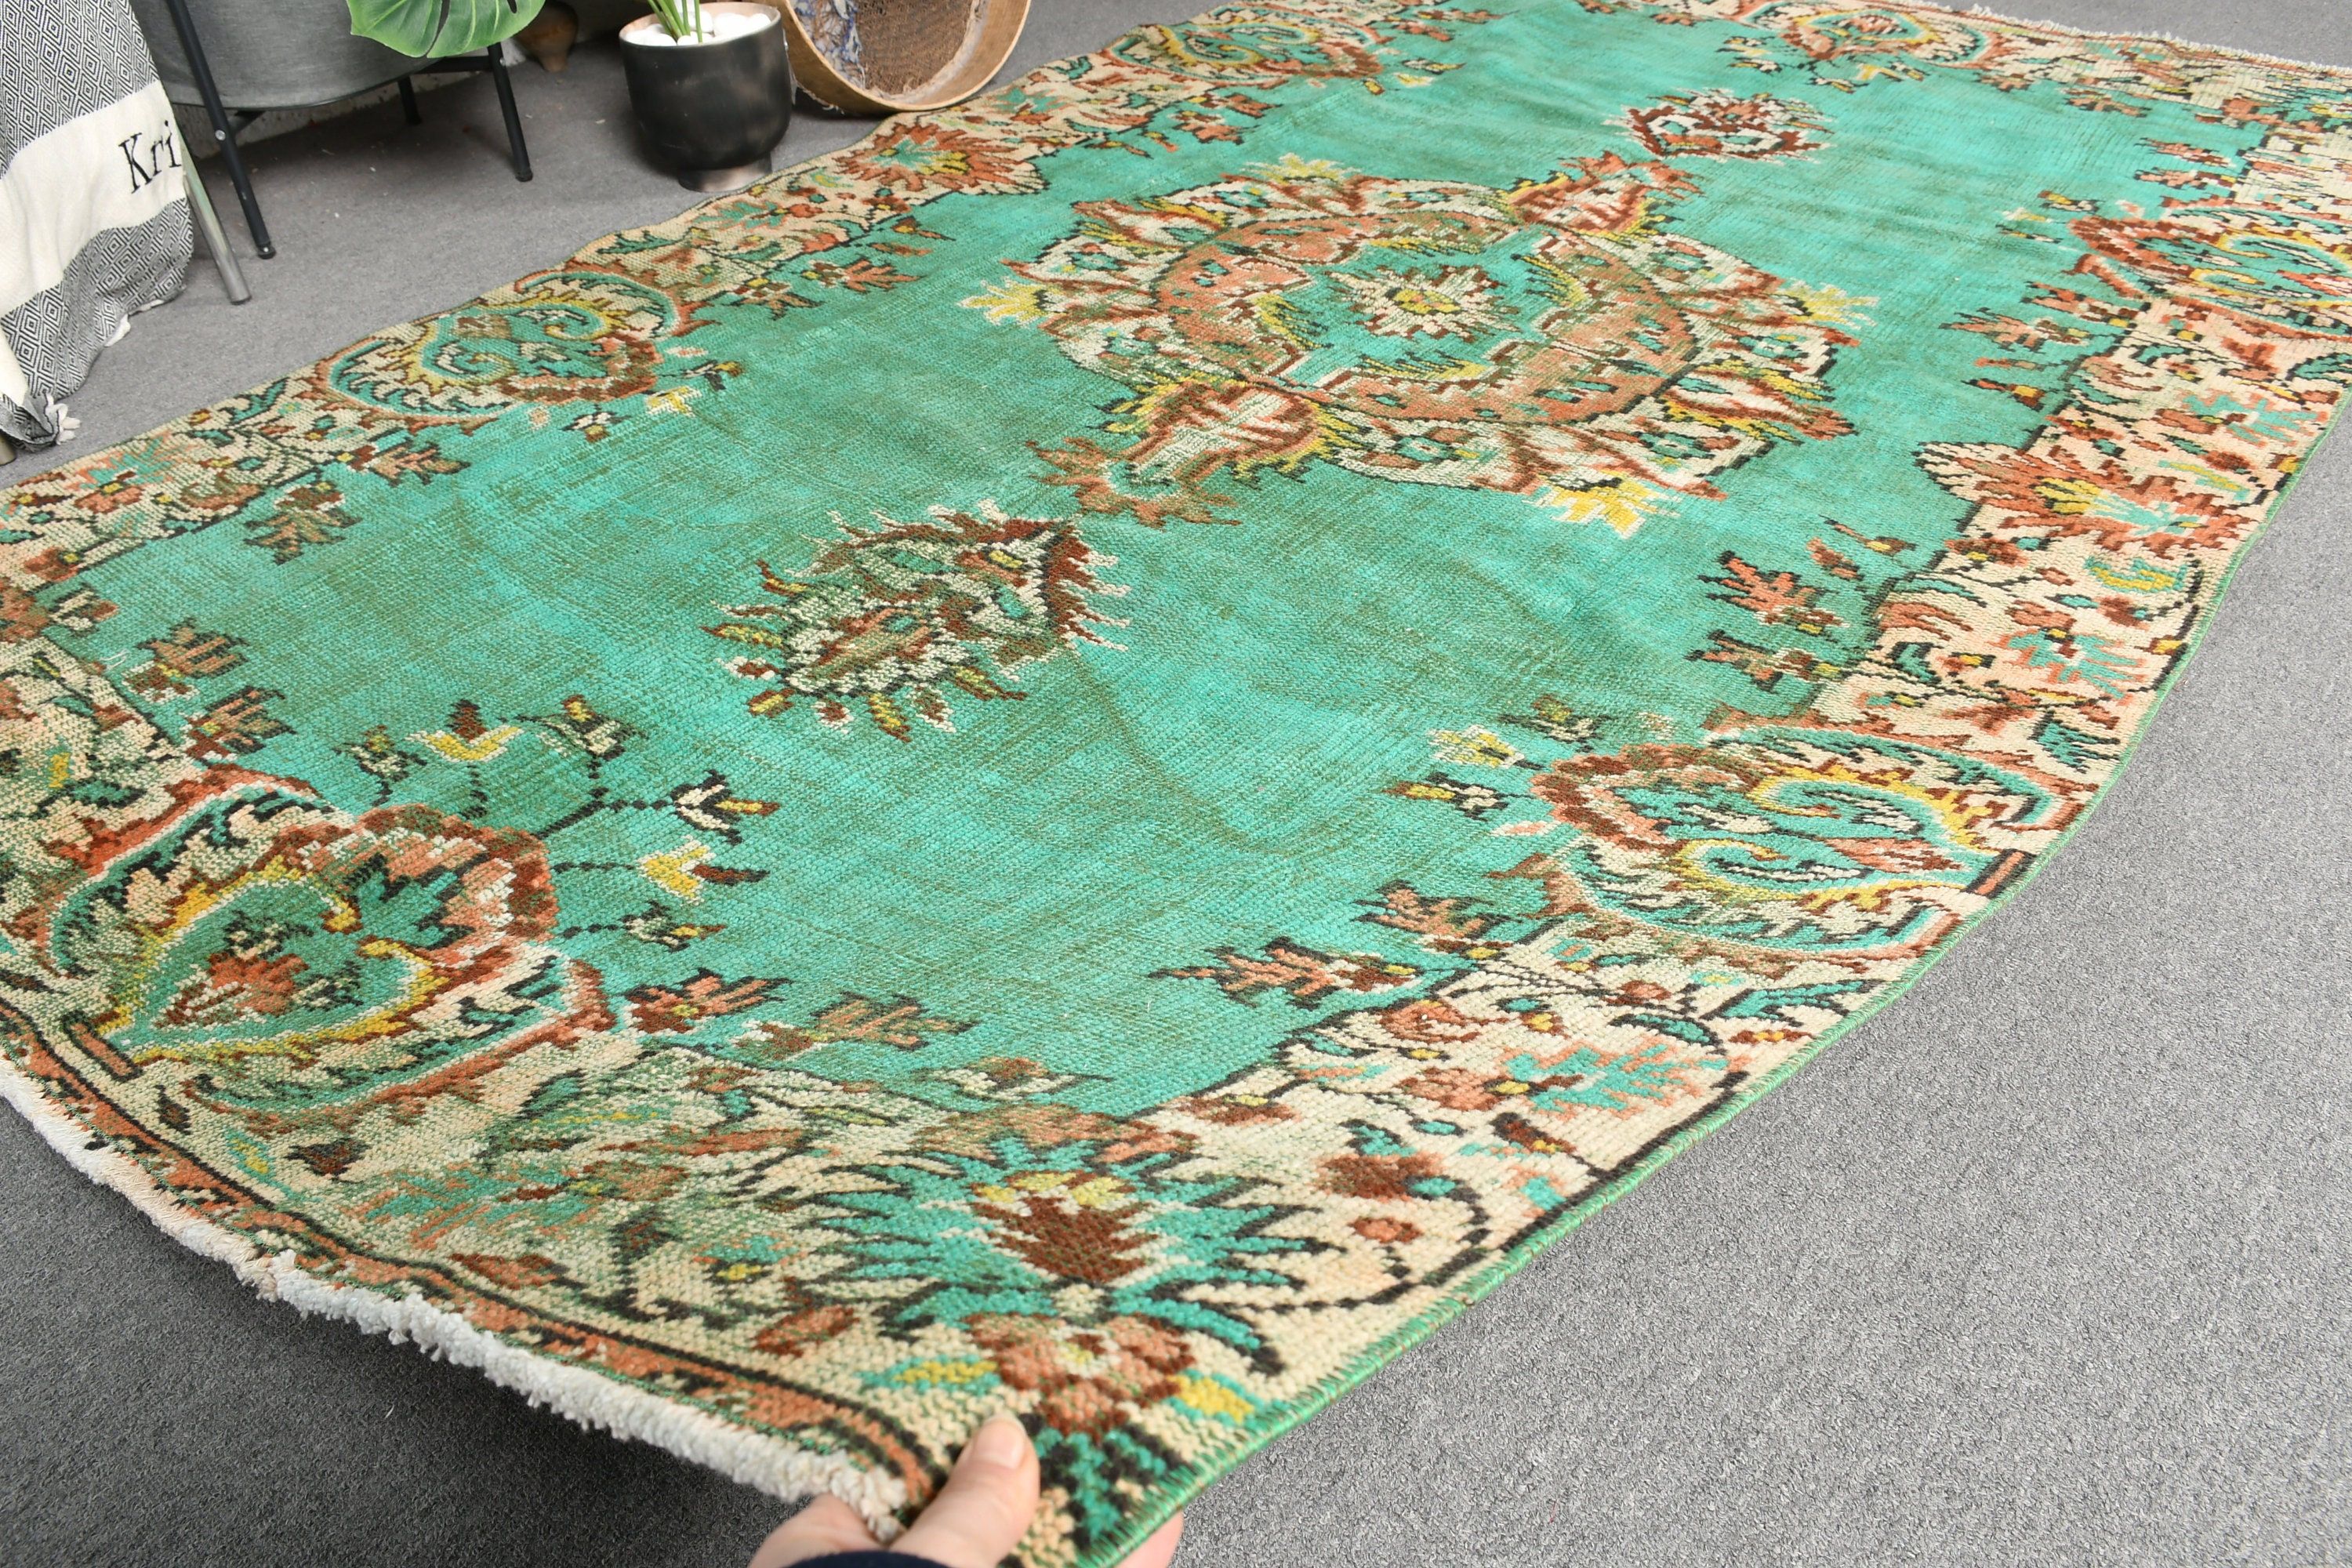 Living Room Rug, Green  4.9x8.4 ft Large Rugs, Kitchen Rugs, Wool Rug, Rugs for Salon, Turkish Rugs, Vintage Rugs, Salon Rug